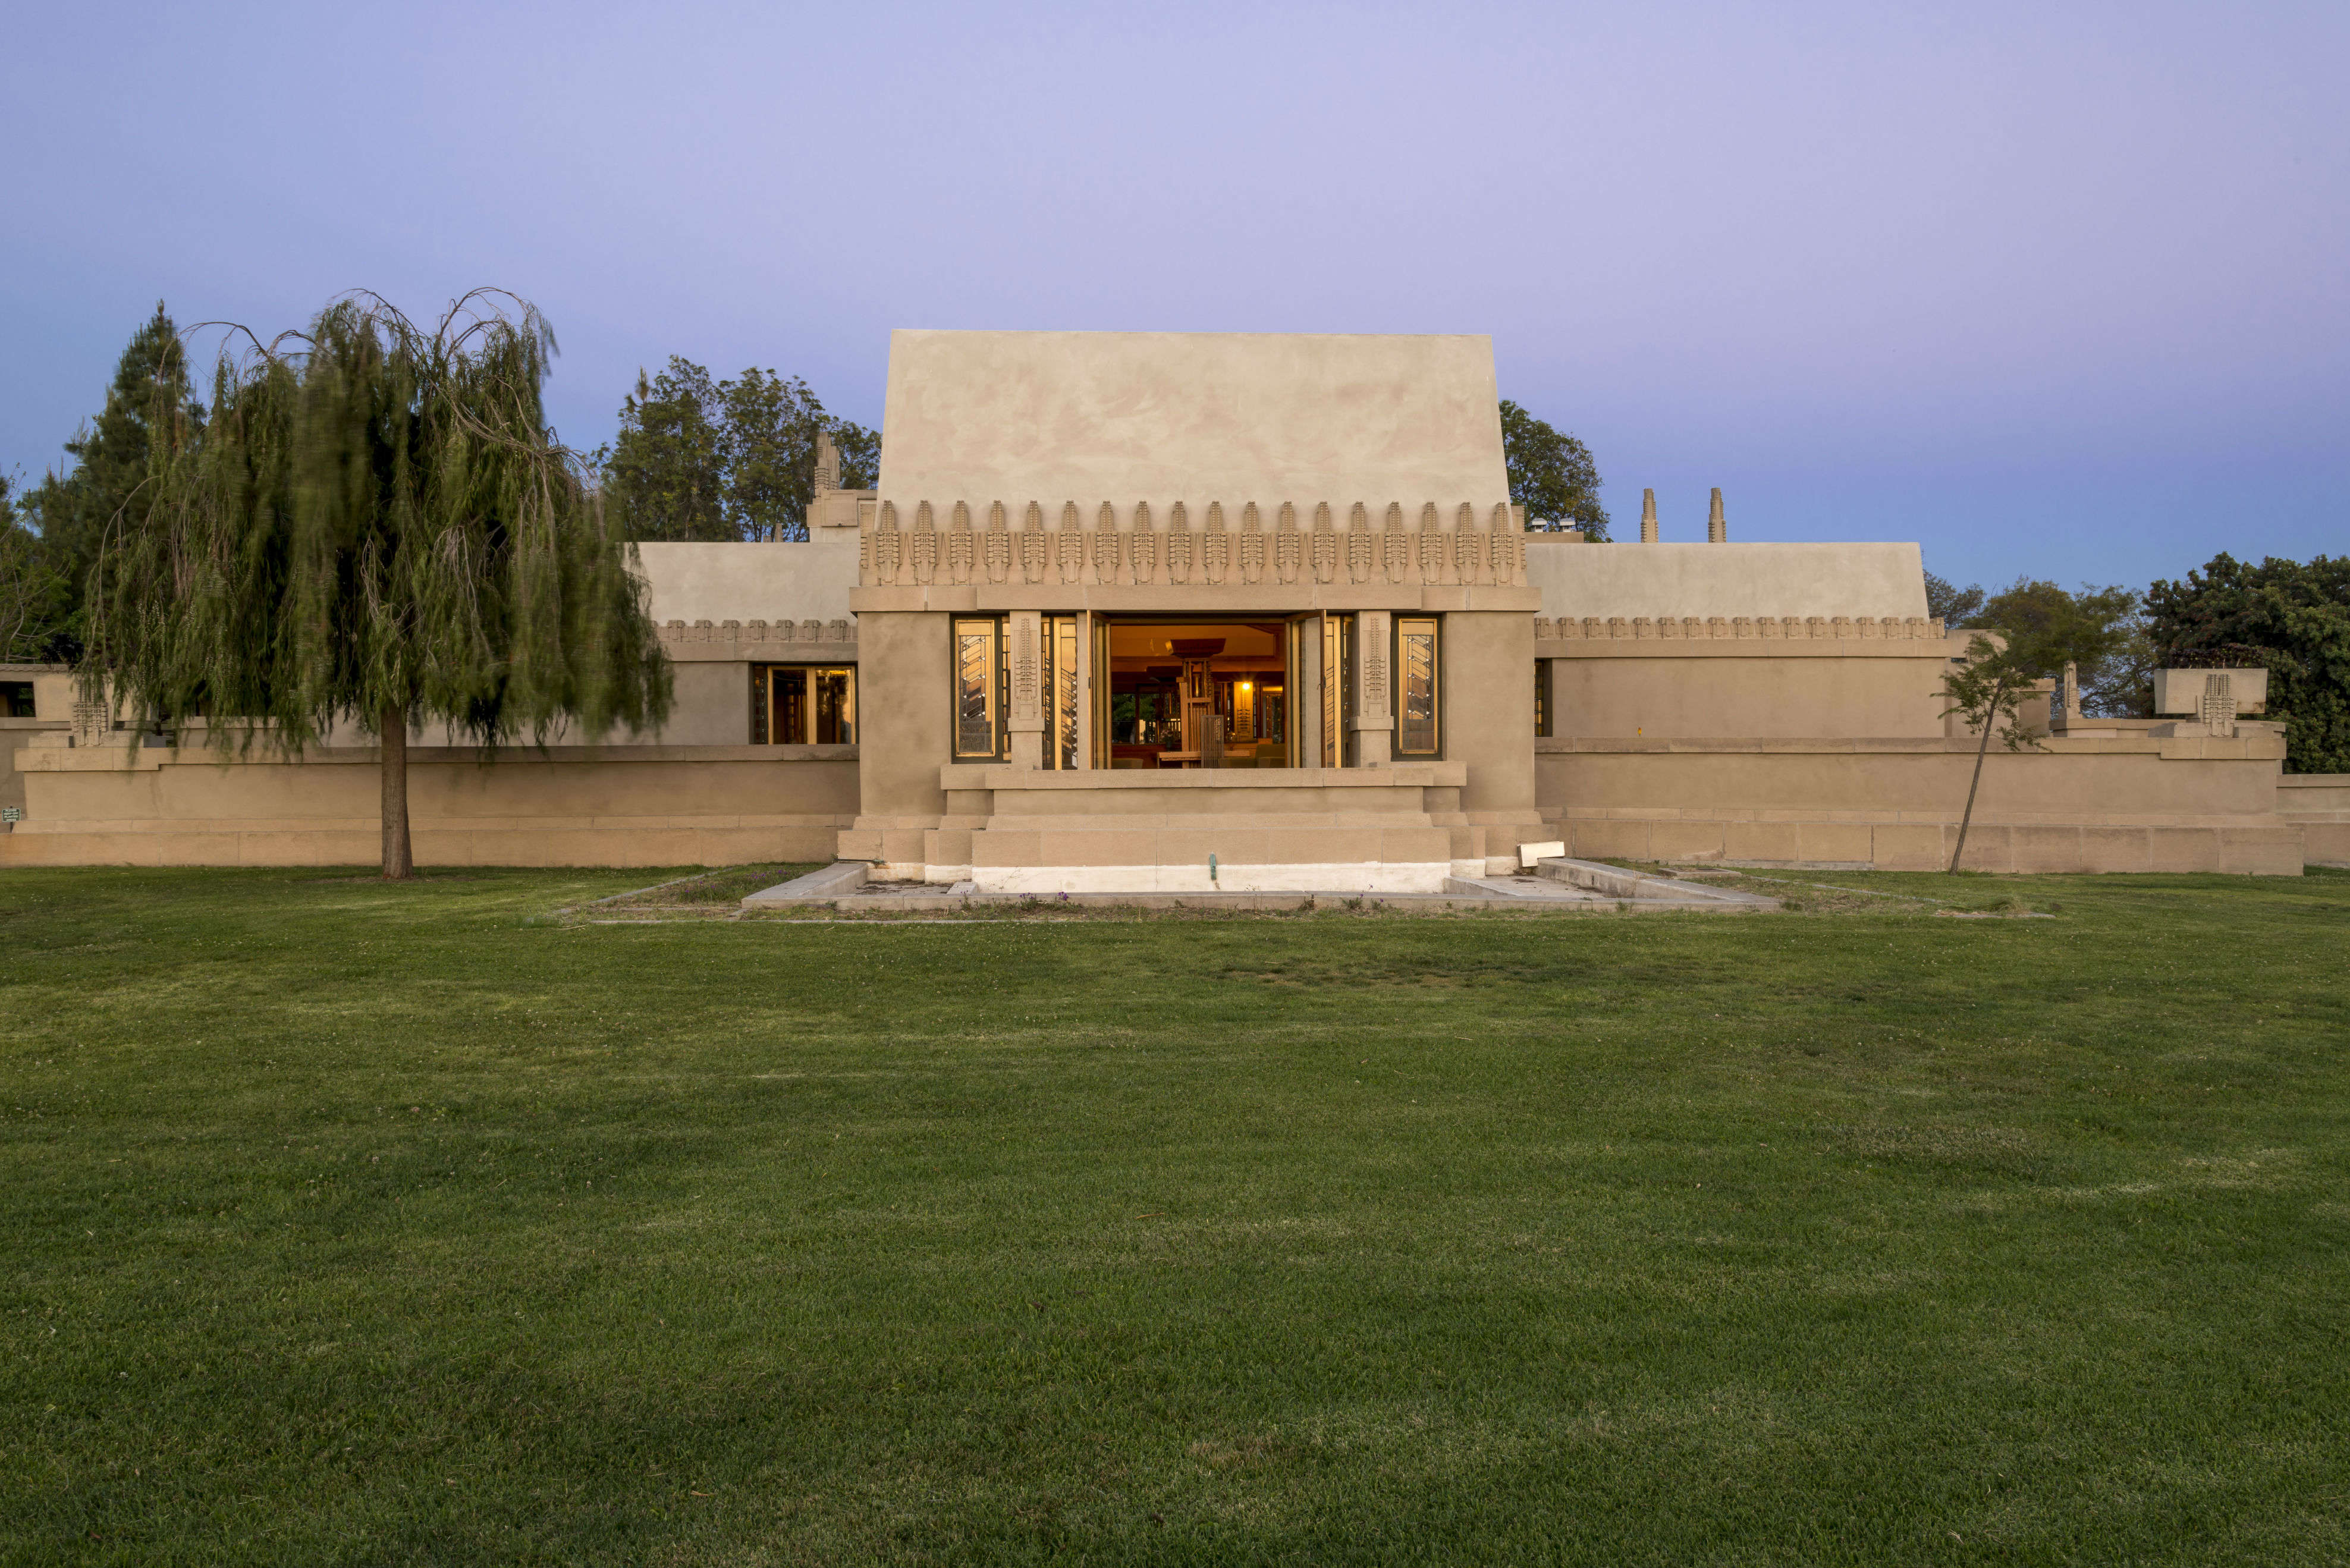 Experiences around Hollyhock House - the newest UNESCO World Heritage Site of Los Angeles